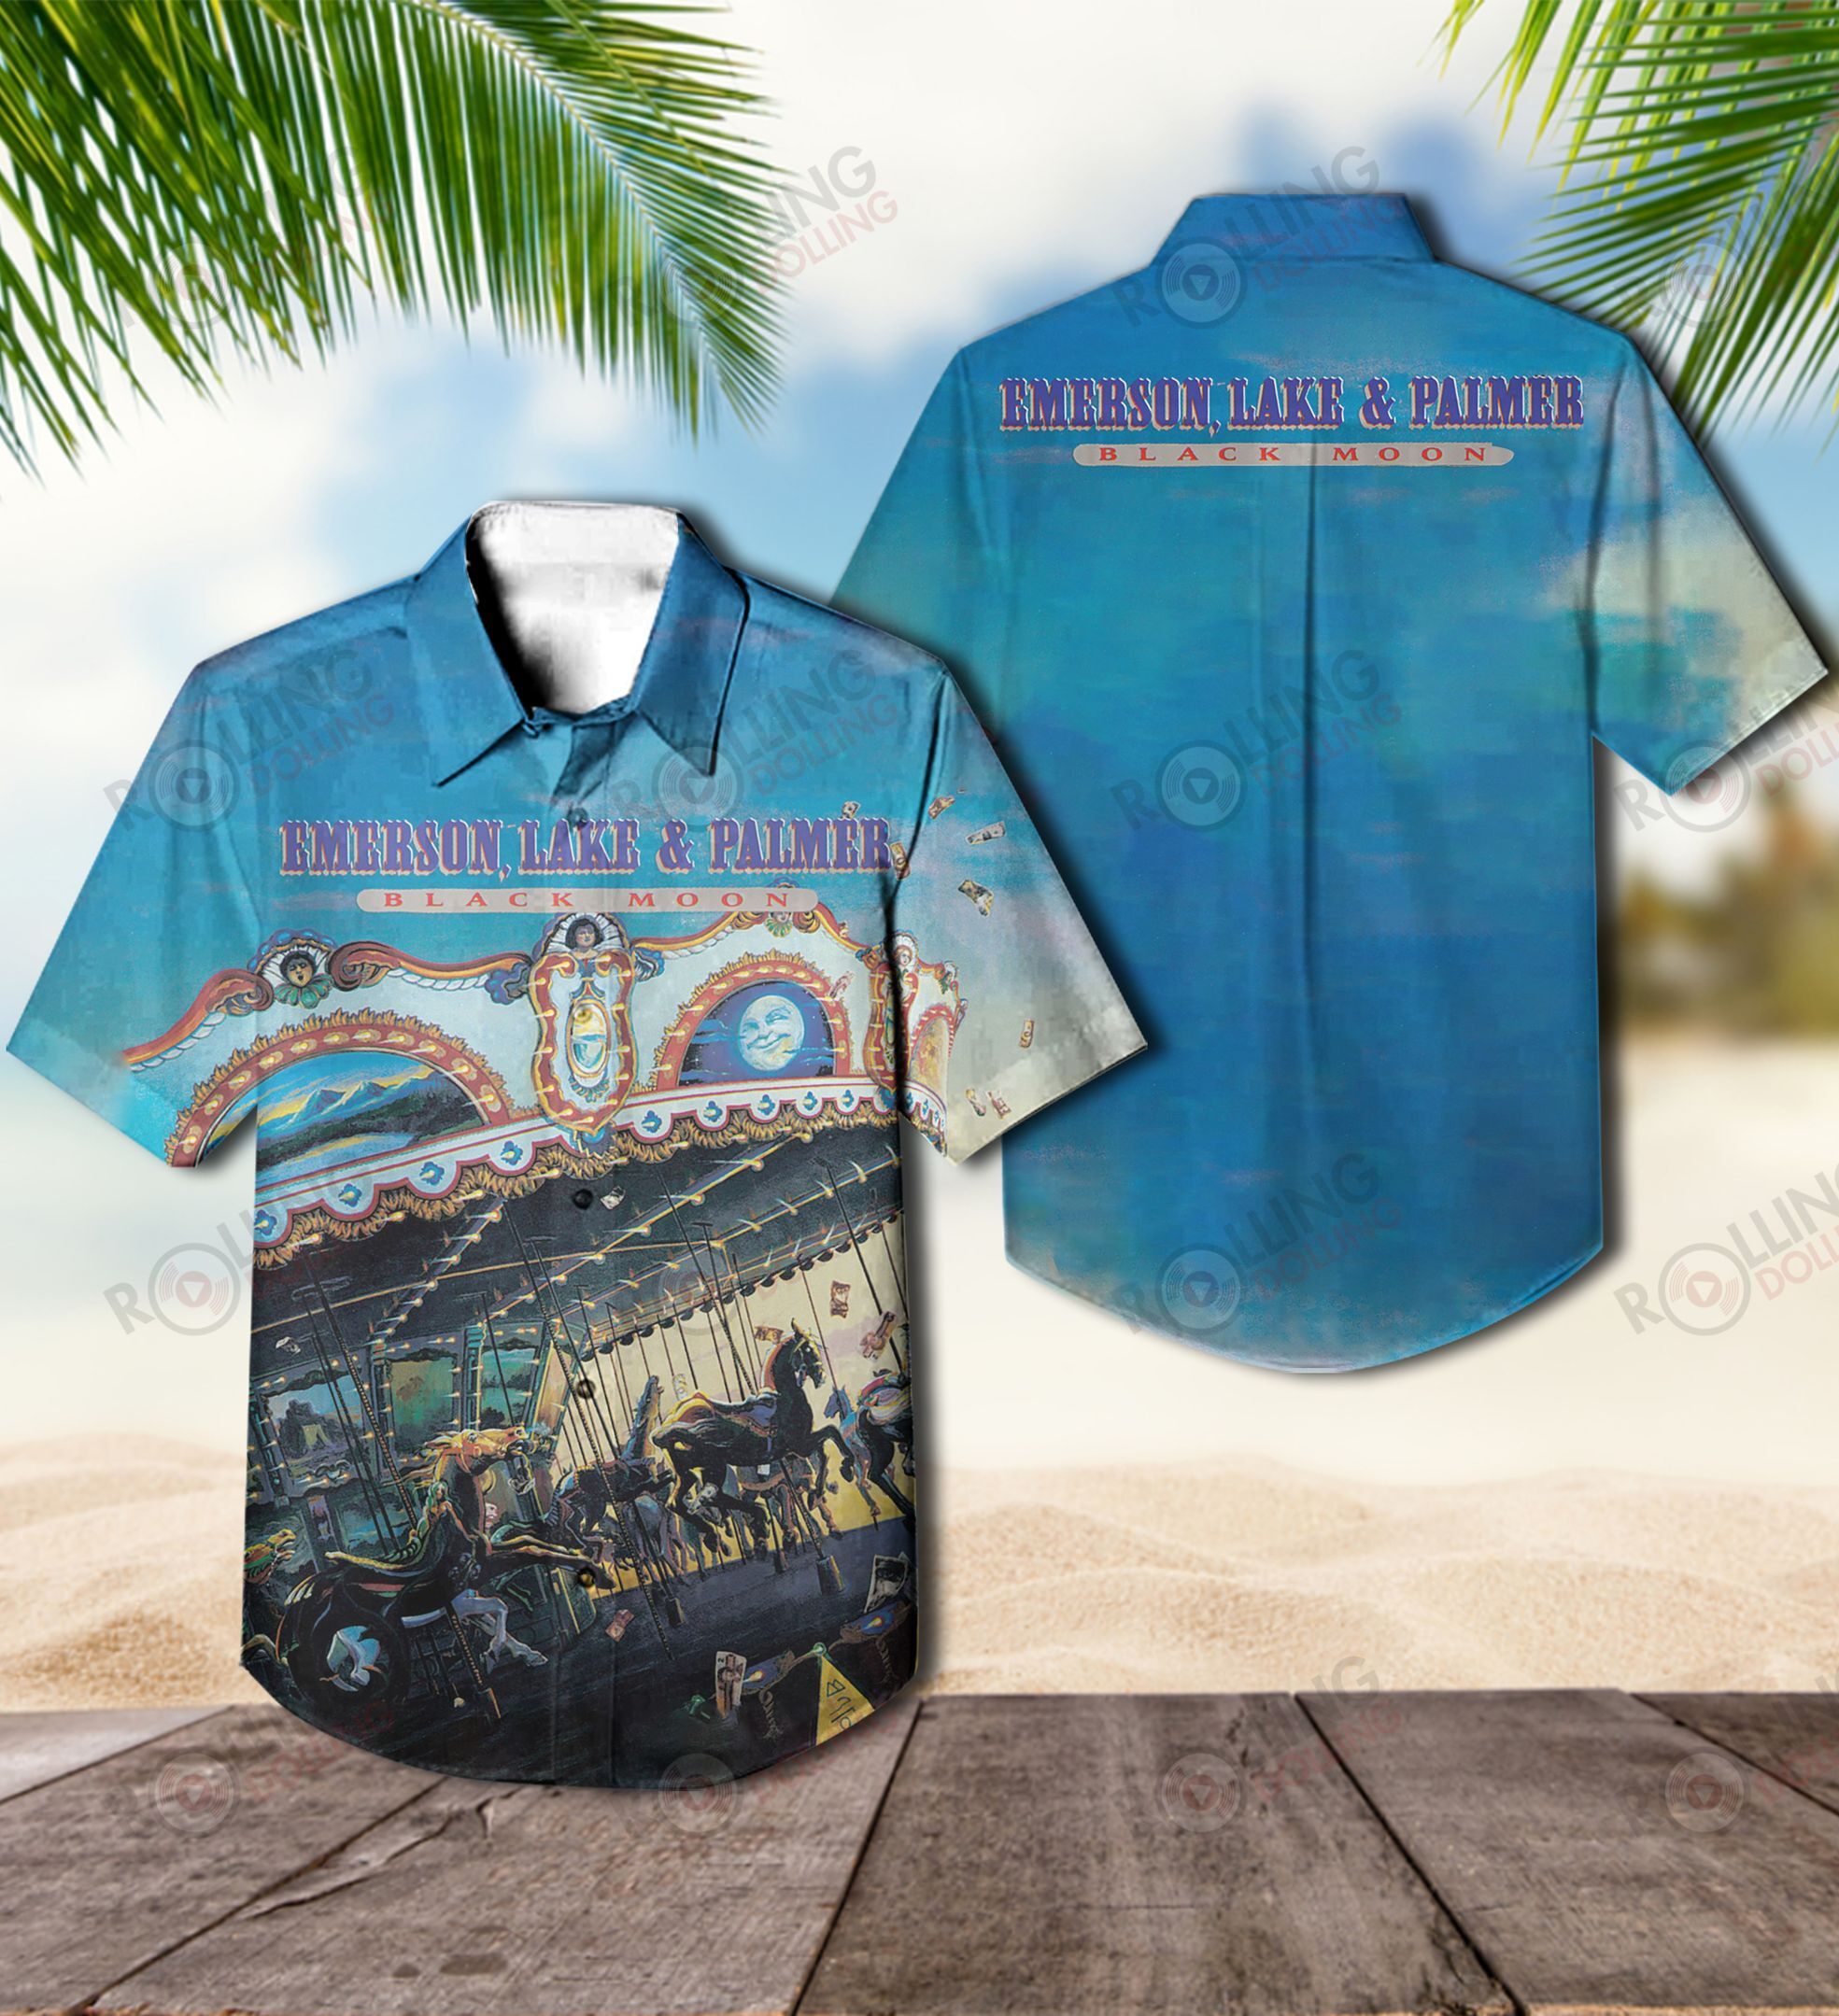 This would make a great gift for any fan who loves Hawaiian Shirt as well as Rock band 94